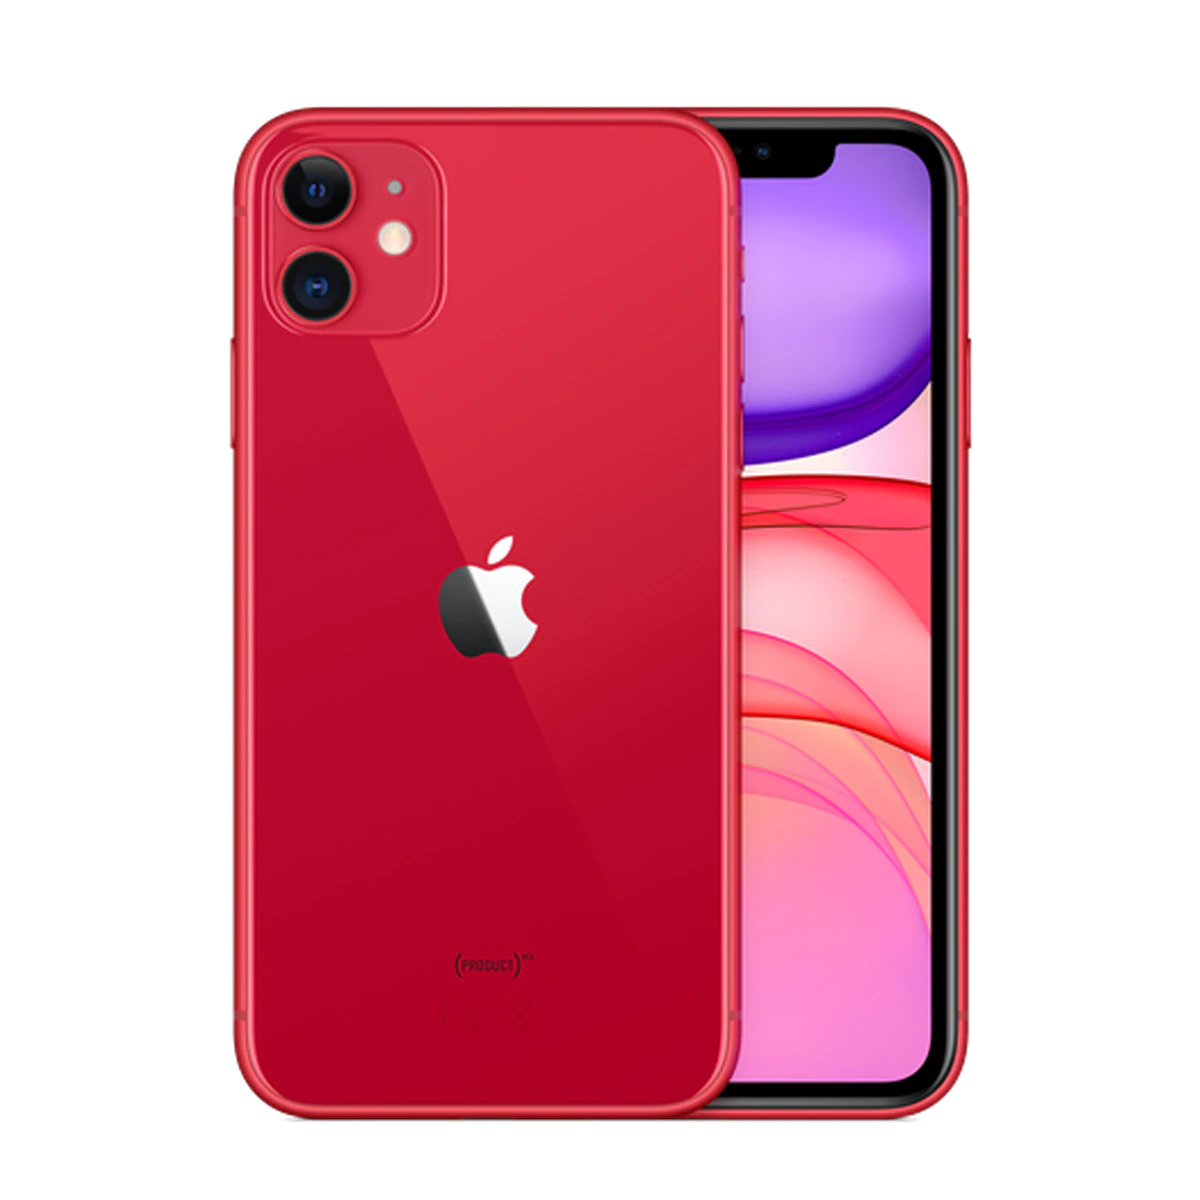 Apple iPhone 11 128GB (PRODUCT)RED Sin Accesorios móvil libre